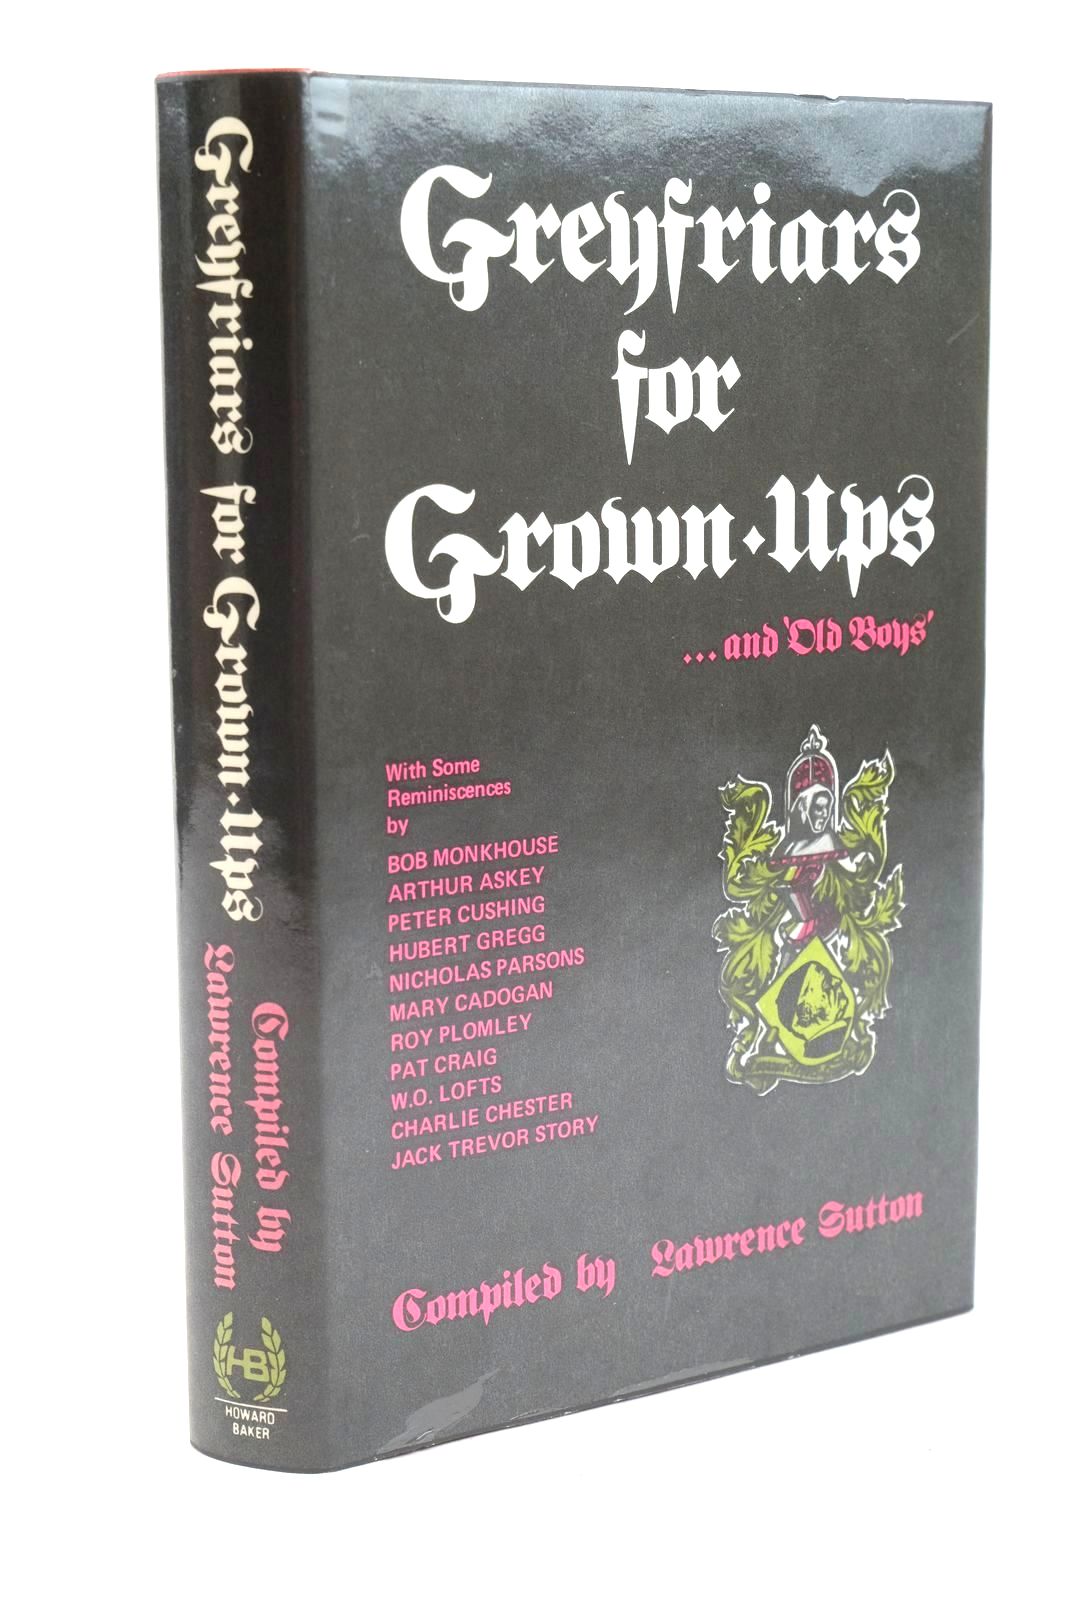 Photo of GREYFRIARS FOR GROWN-UPS written by Sutton, Lawrence Richards, Frank published by Howard Baker (STOCK CODE: 1319705)  for sale by Stella & Rose's Books